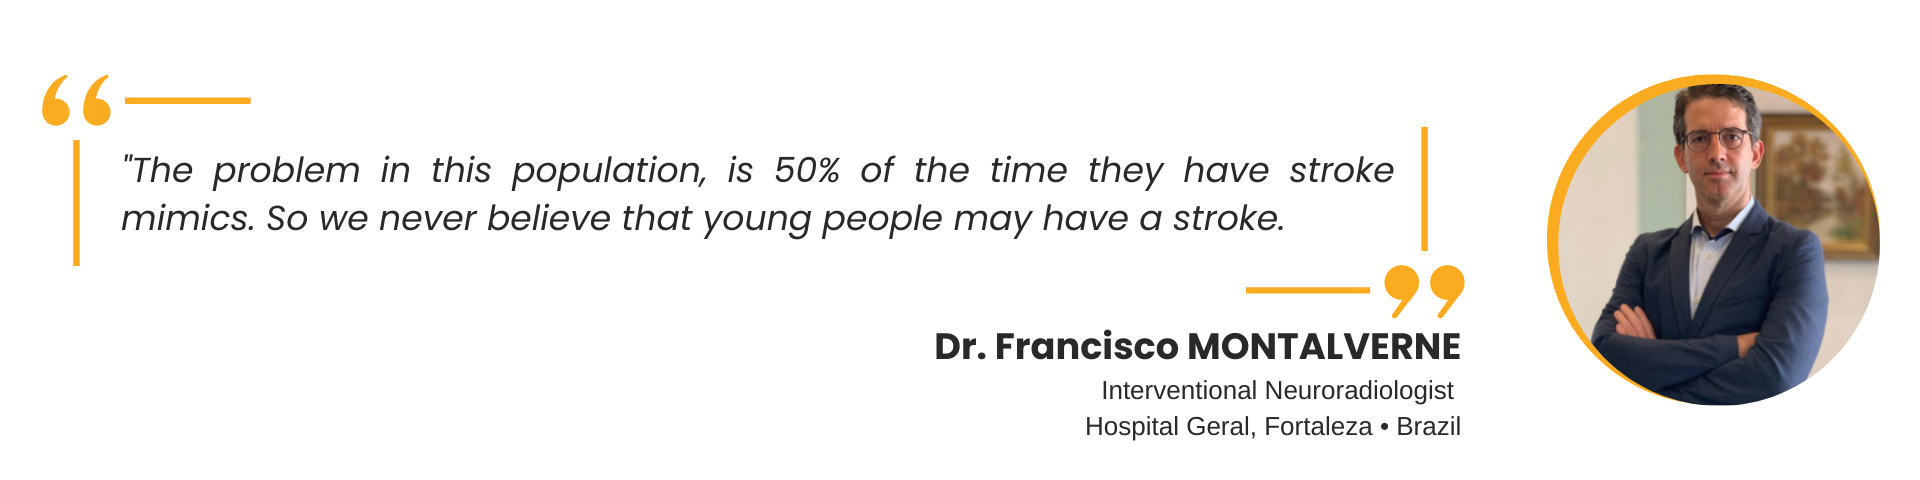 Quotation by Doctor Francisco MONTALVERNE: 